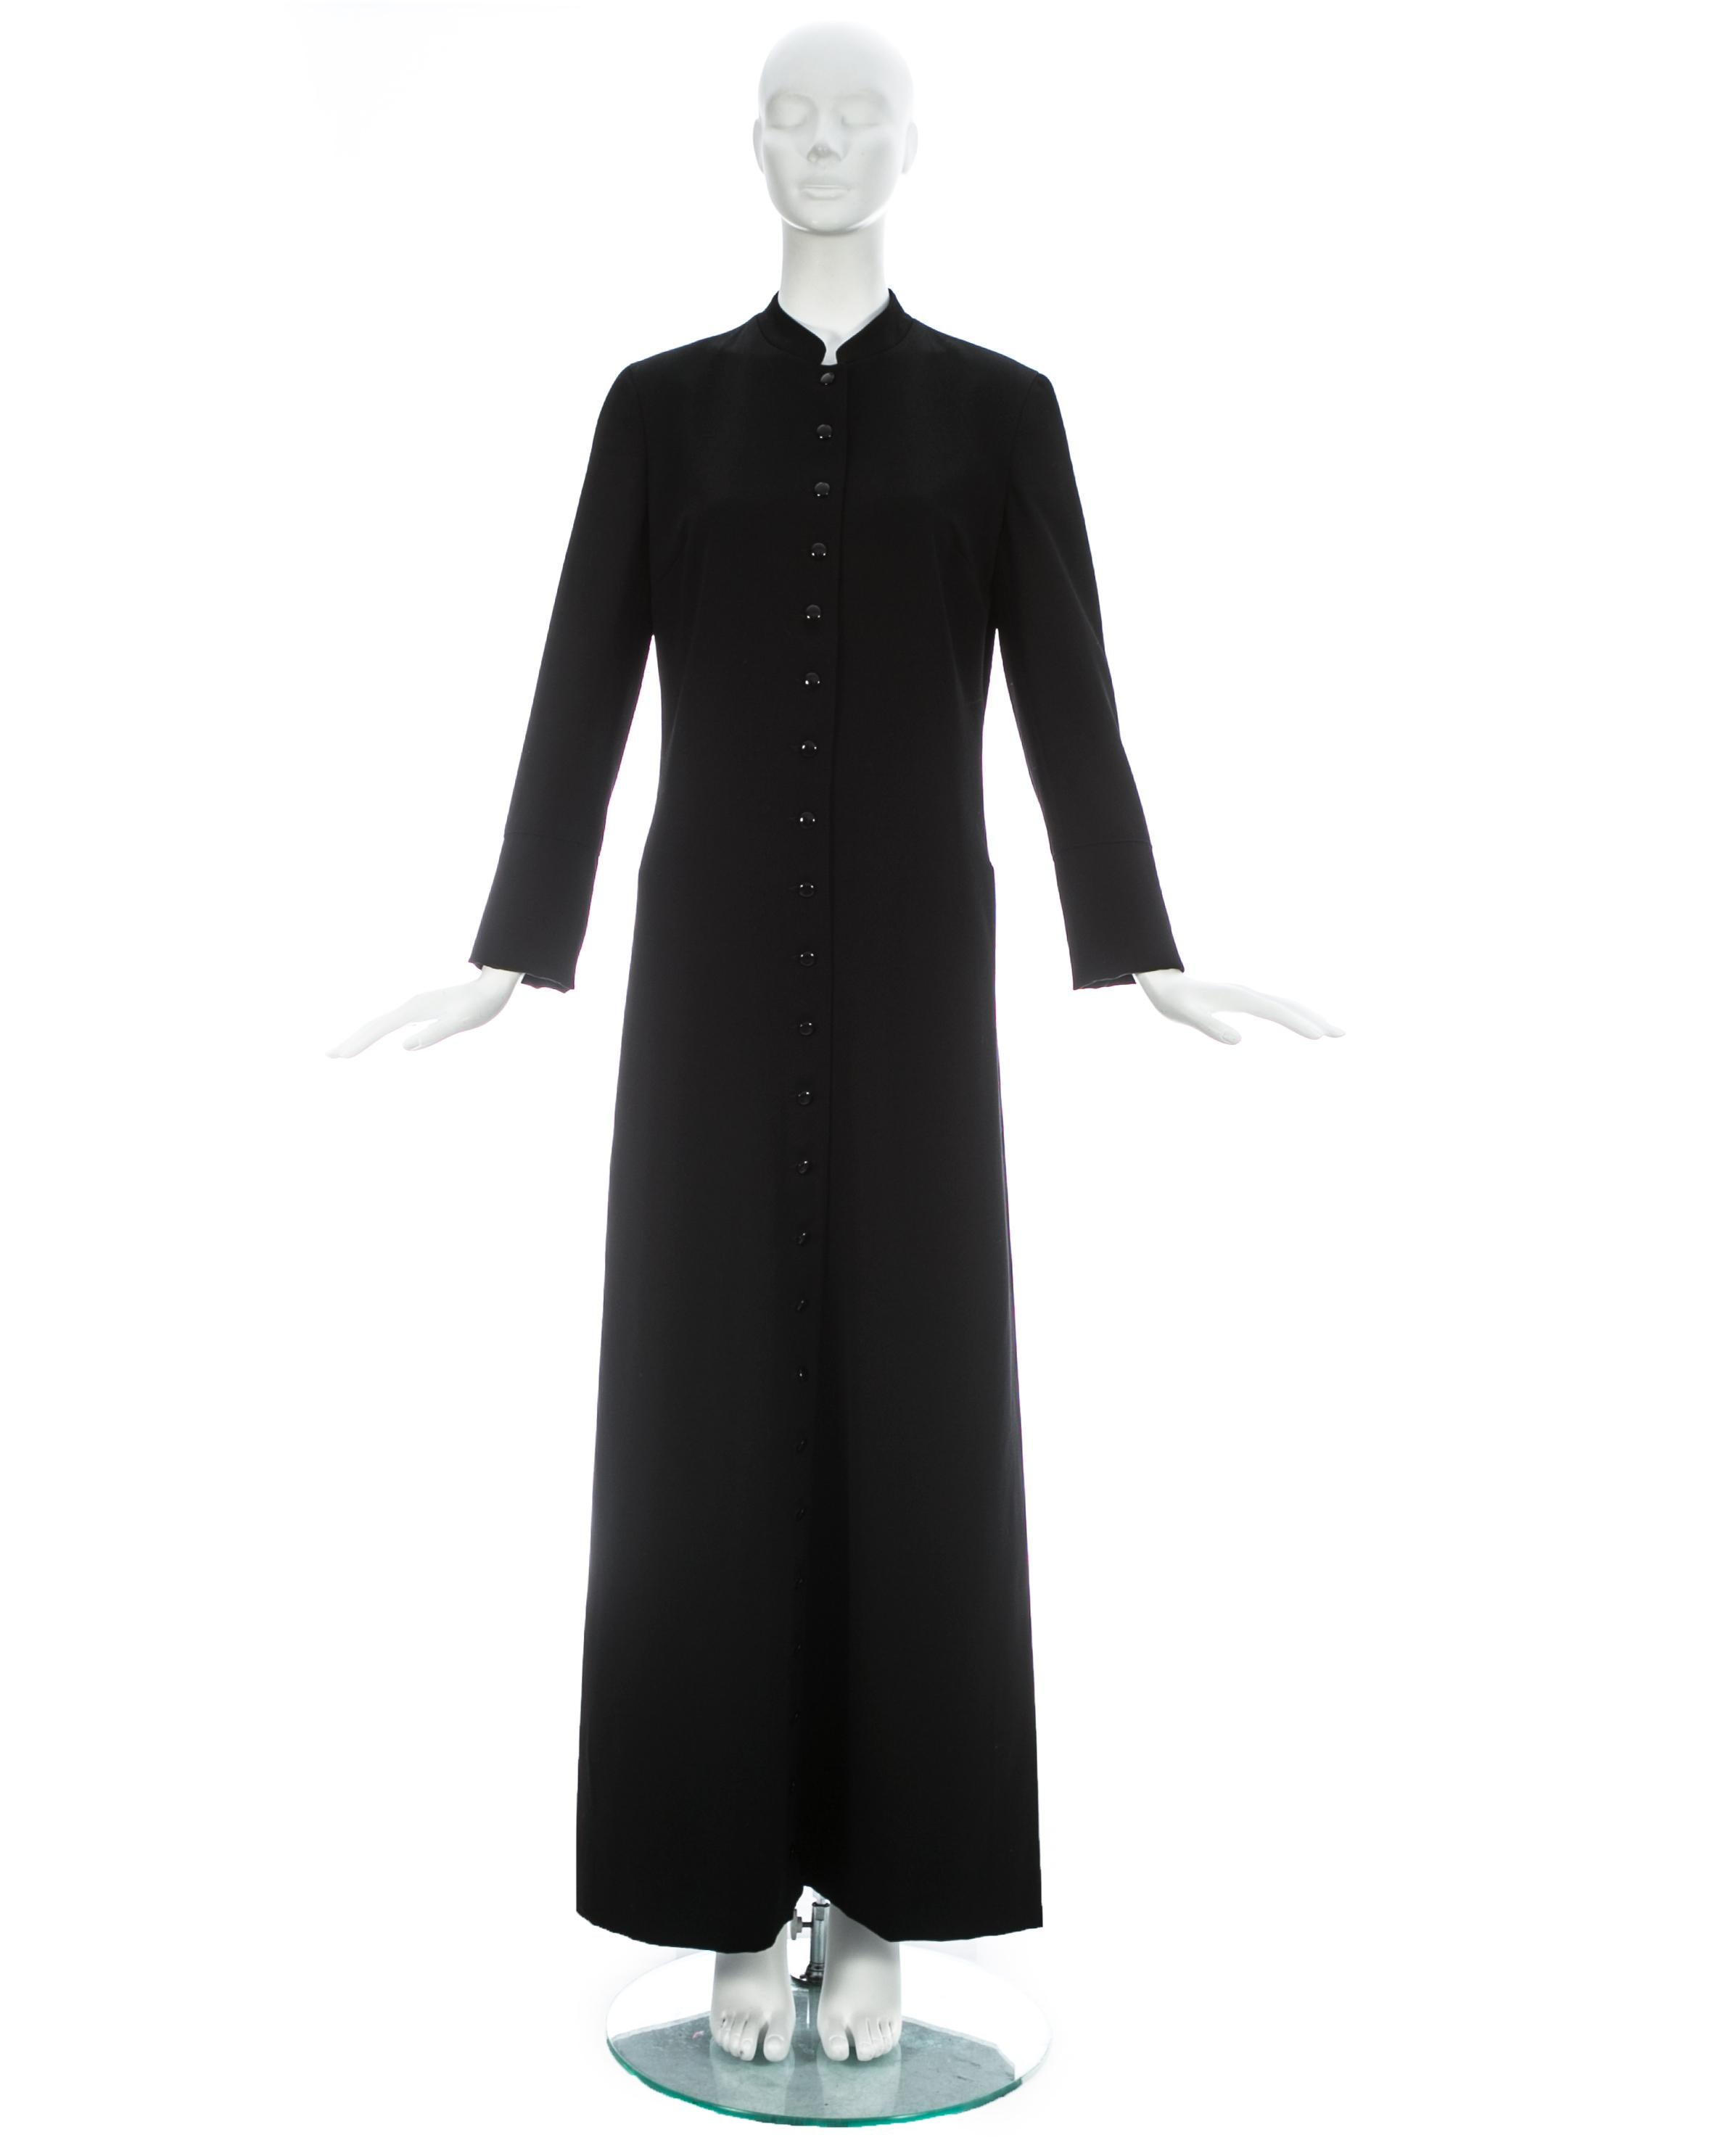 Dolce & Gabbana; Black wool full length priest coat with 23 button closures, 2 hidden side pockets, and red silk lining

Fall-Winter 1997